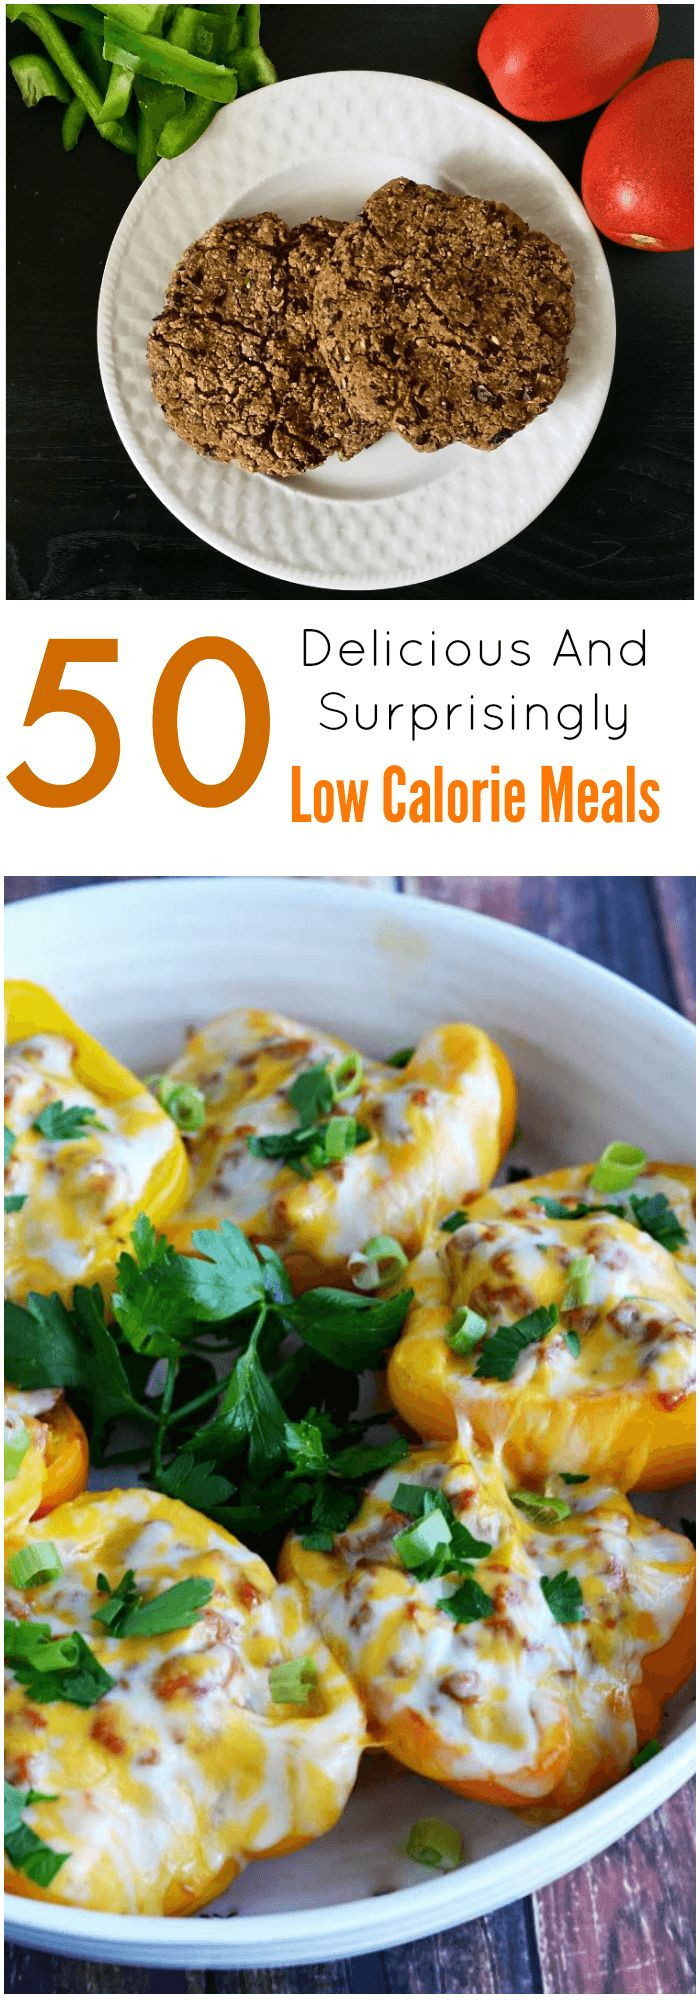 Low Calorie Easy Dinners
 50 Delicious And Surprisingly Low Calorie Meals